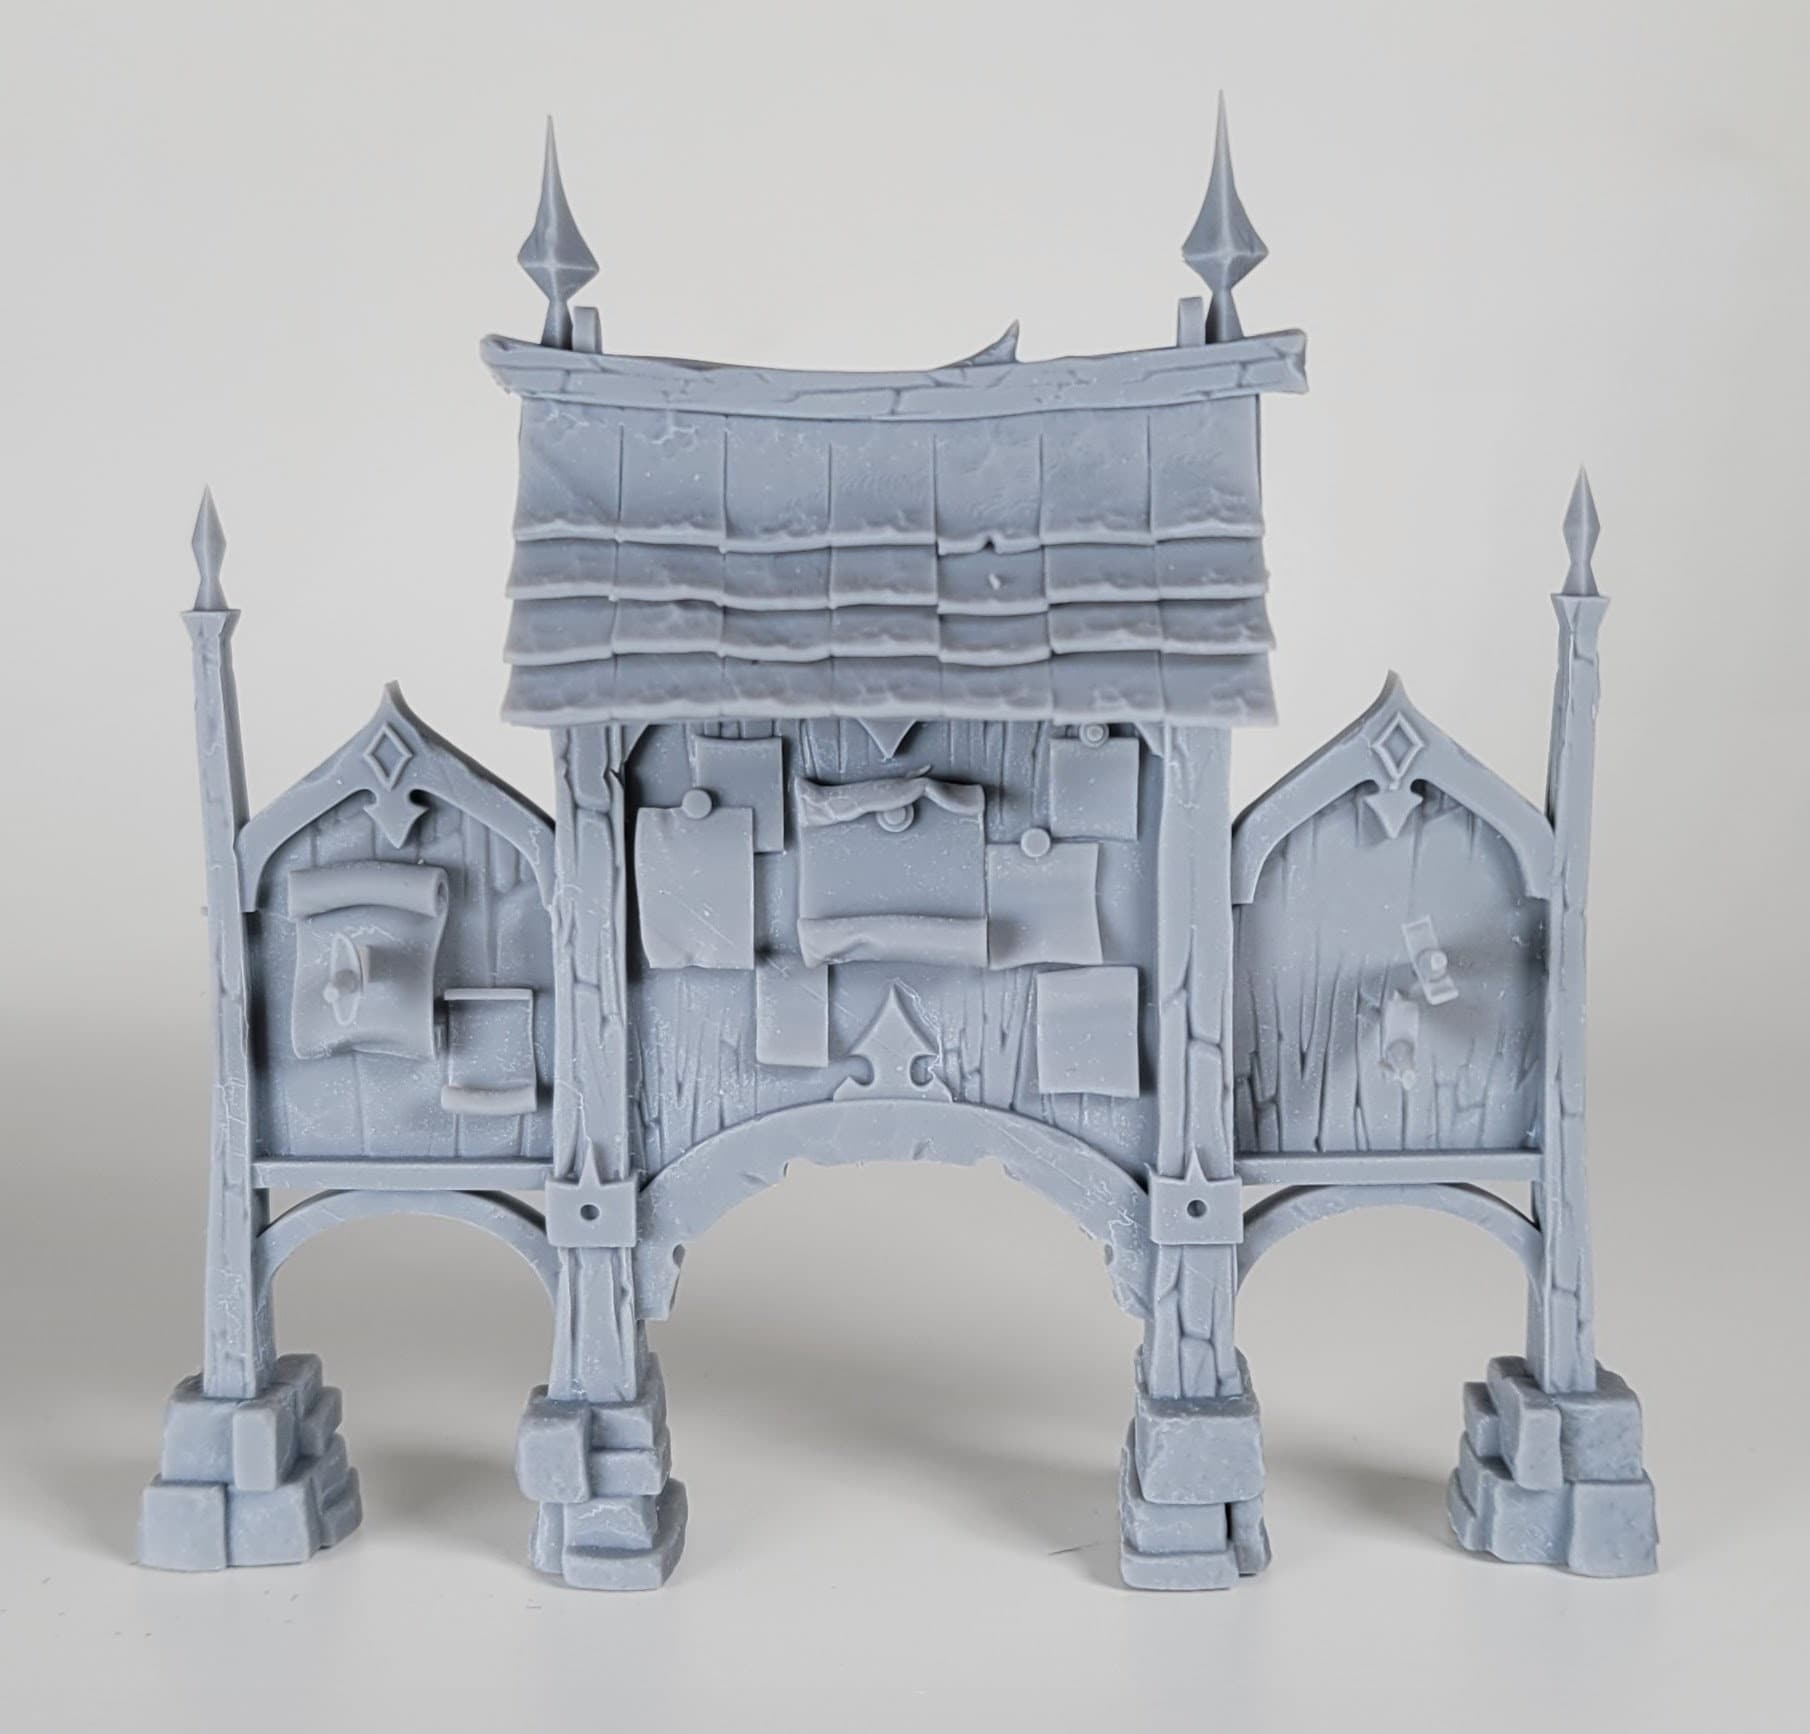 Town Guard Miniatures and Themed Props/Scatter Terrain/Scenery - D&D